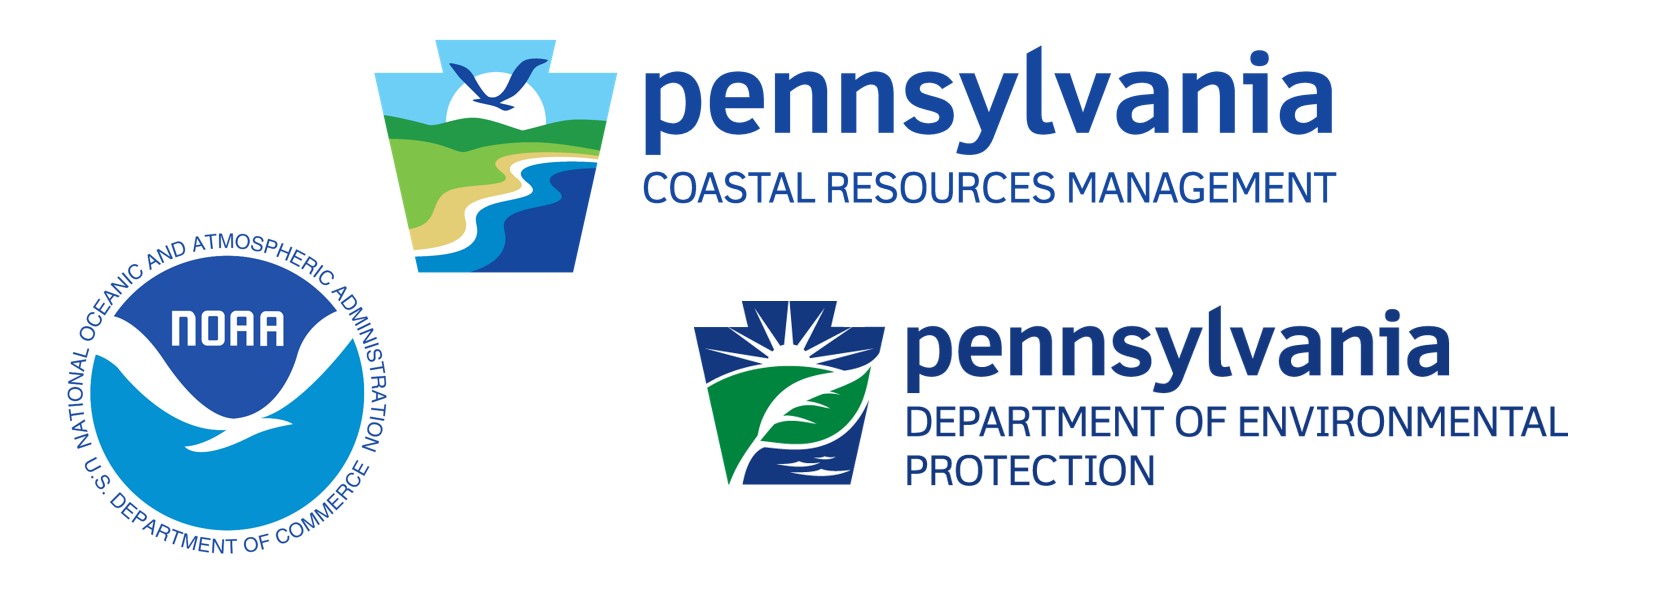 PA Coastal Resources Management and associated logos